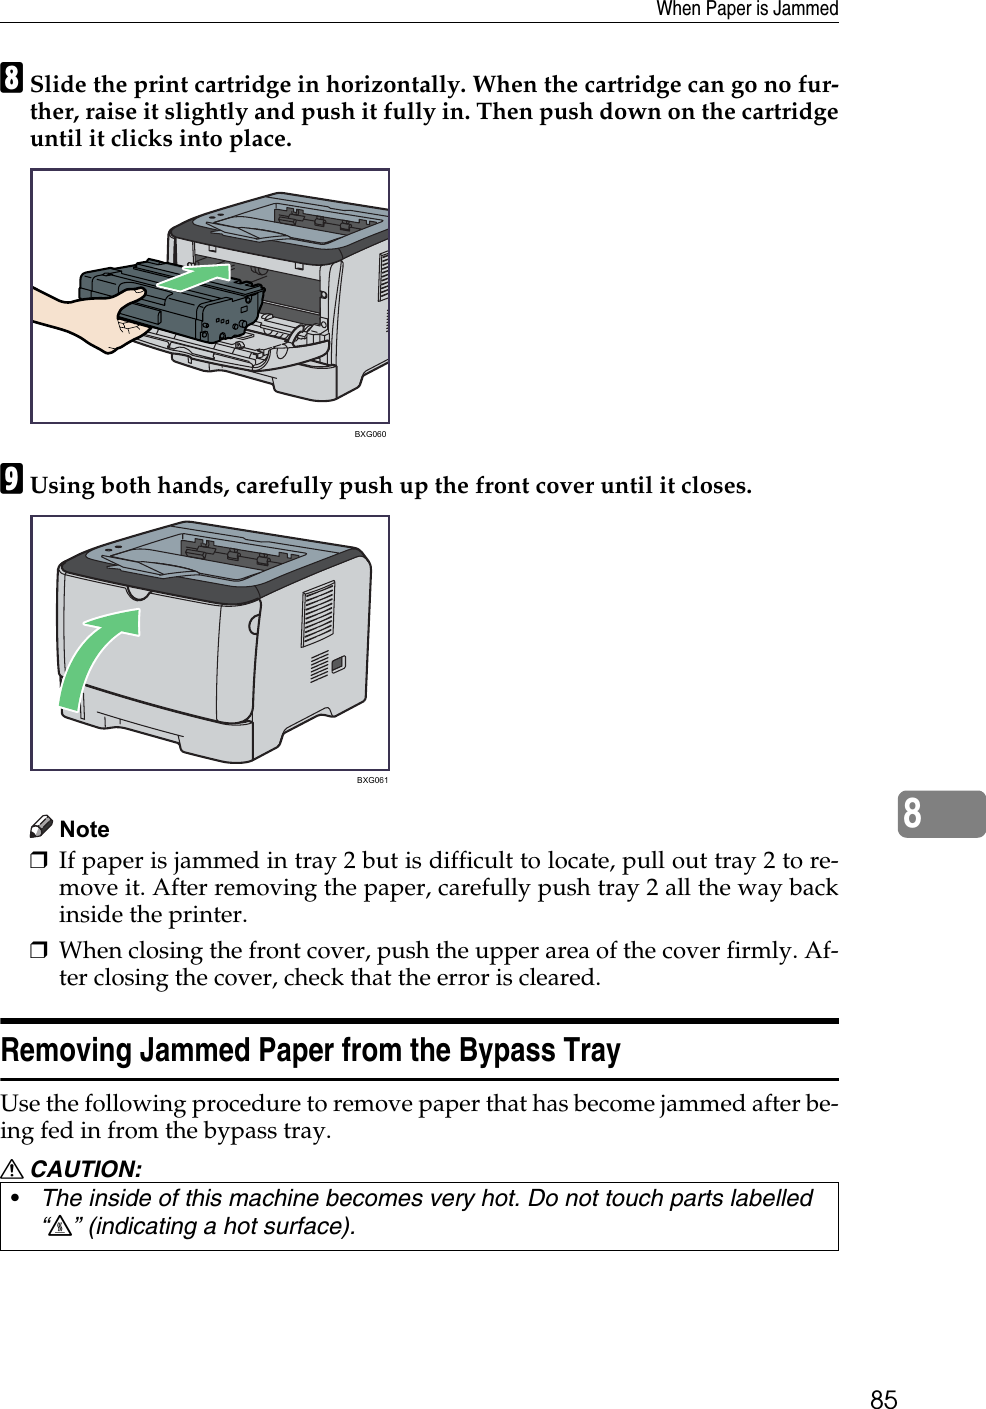 When Paper is Jammed858HSlide the print cartridge in horizontally. When the cartridge can go no fur-ther, raise it slightly and push it fully in. Then push down on the cartridgeuntil it clicks into place.IUsing both hands, carefully push up the front cover until it closes.Note❒If paper is jammed in tray 2 but is difficult to locate, pull out tray 2 to re-move it. After removing the paper, carefully push tray 2 all the way backinside the printer.❒When closing the front cover, push the upper area of the cover firmly. Af-ter closing the cover, check that the error is cleared.Removing Jammed Paper from the Bypass TrayUse the following procedure to remove paper that has become jammed after be-ing fed in from the bypass tray.R CAUTION:•The inside of this machine becomes very hot. Do not touch parts labelled “v” (indicating a hot surface).BXG060BXG061